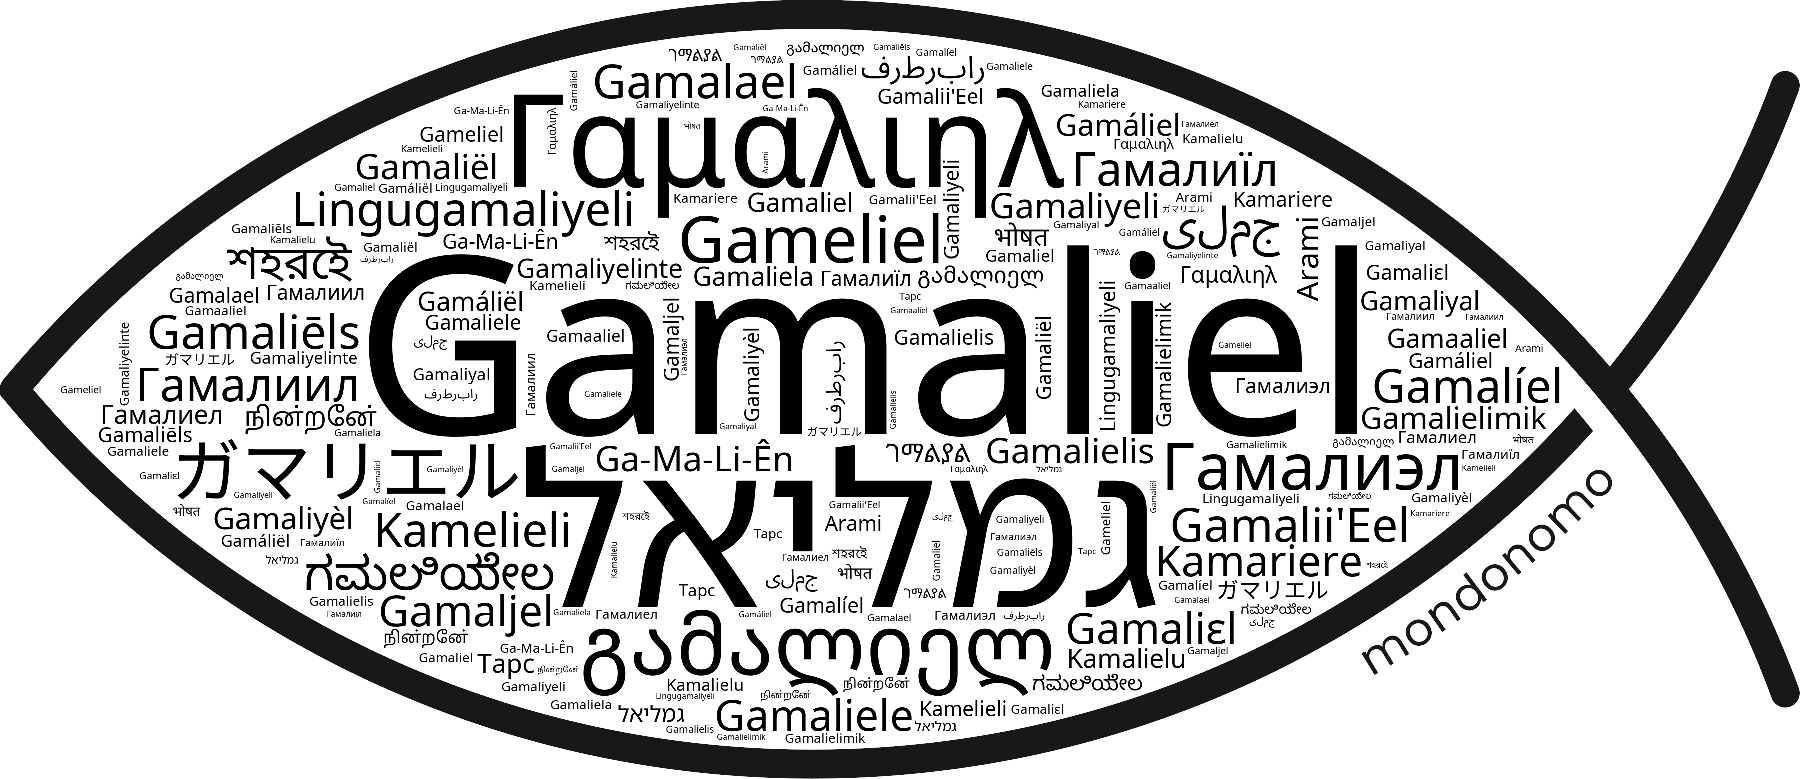 Name Gamaliel in the world's Bibles